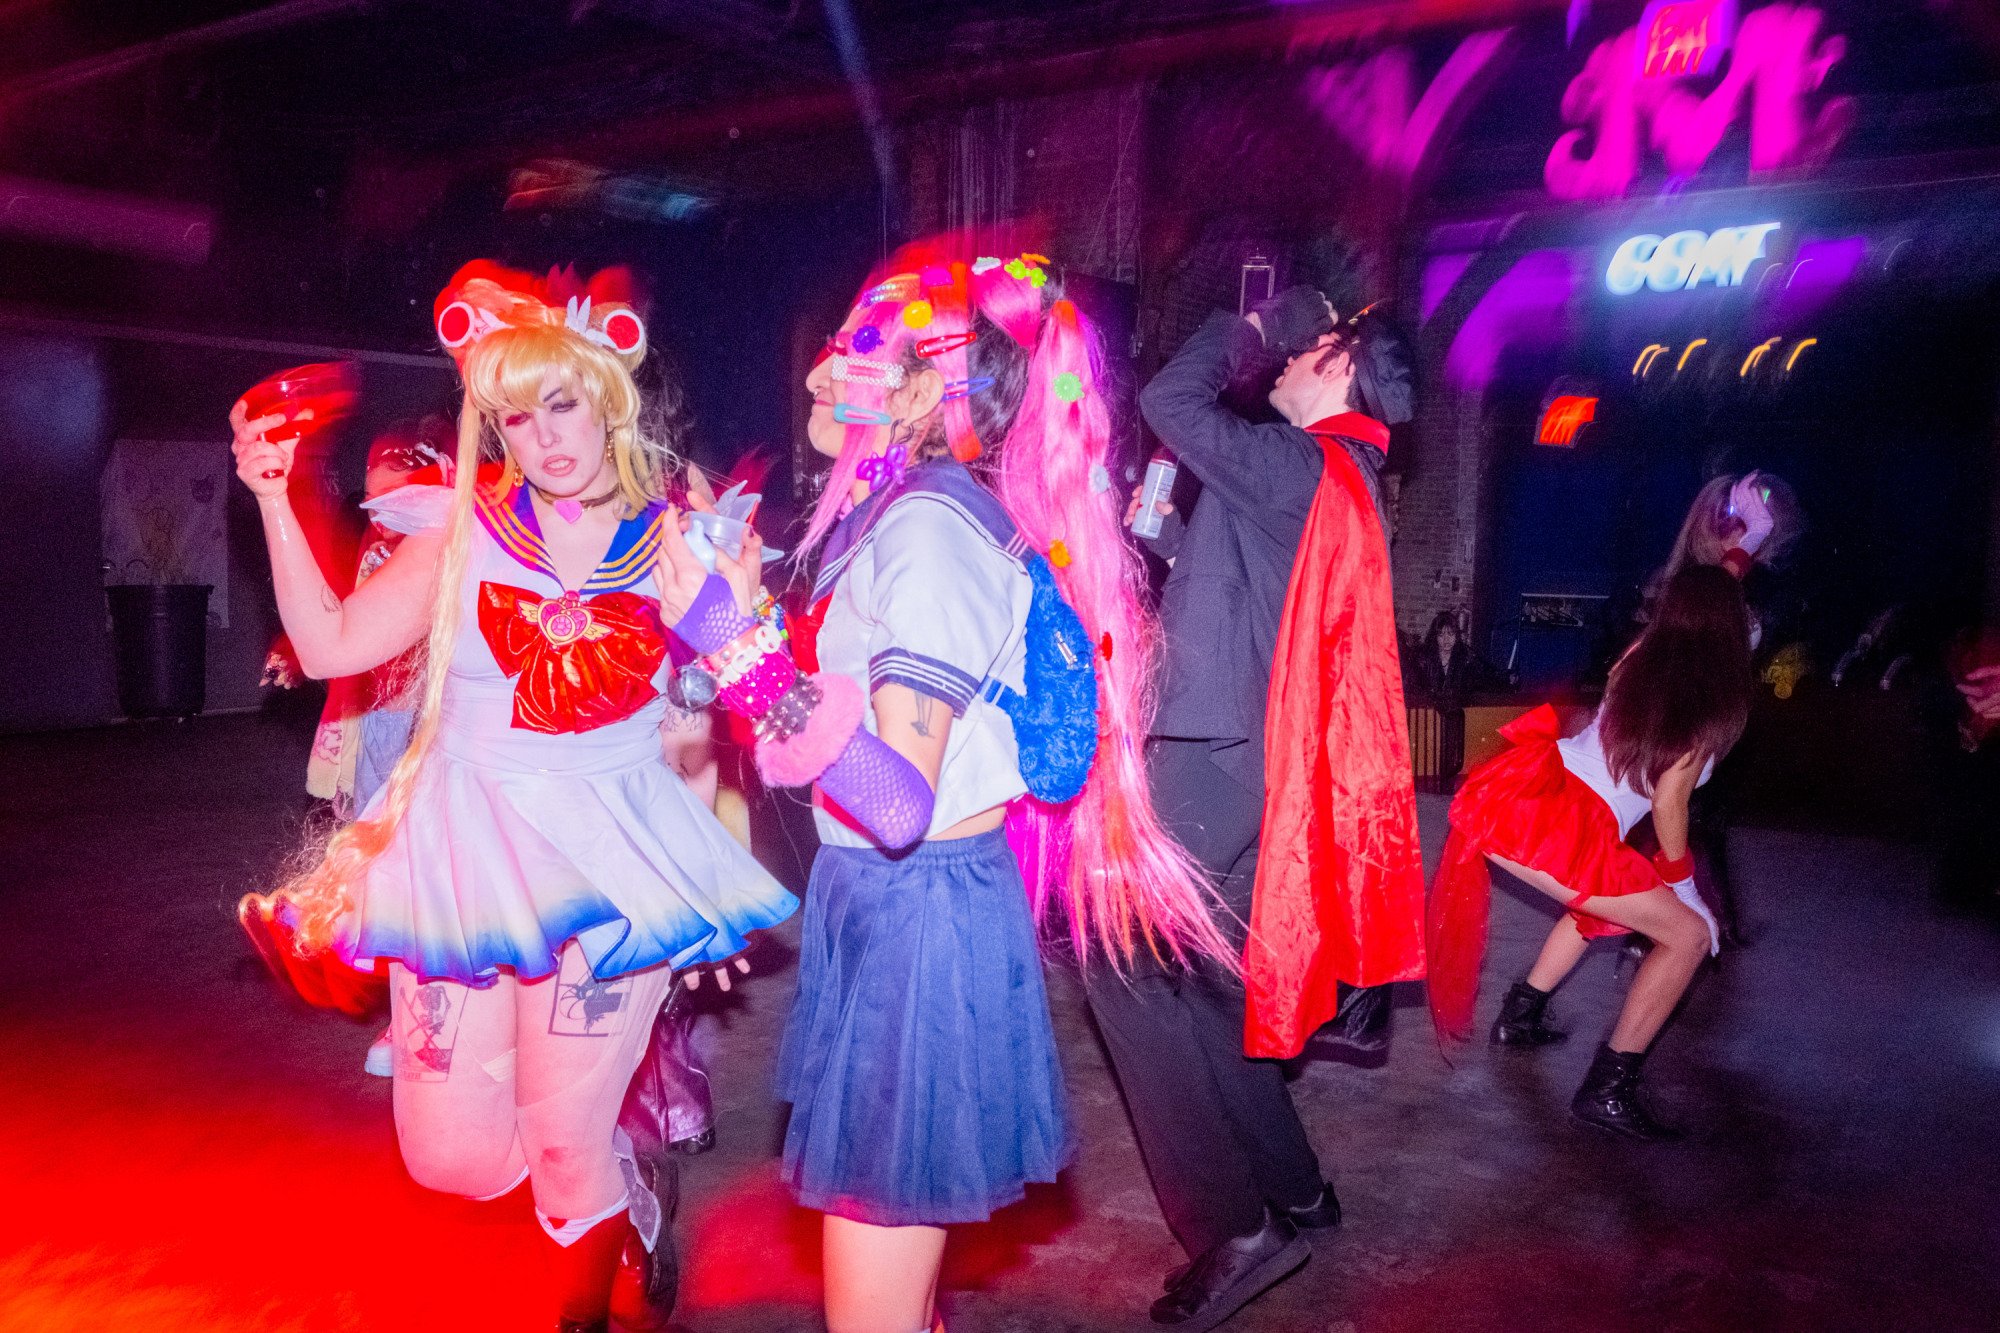 Two individuals dancing in Sailor Moon costumes